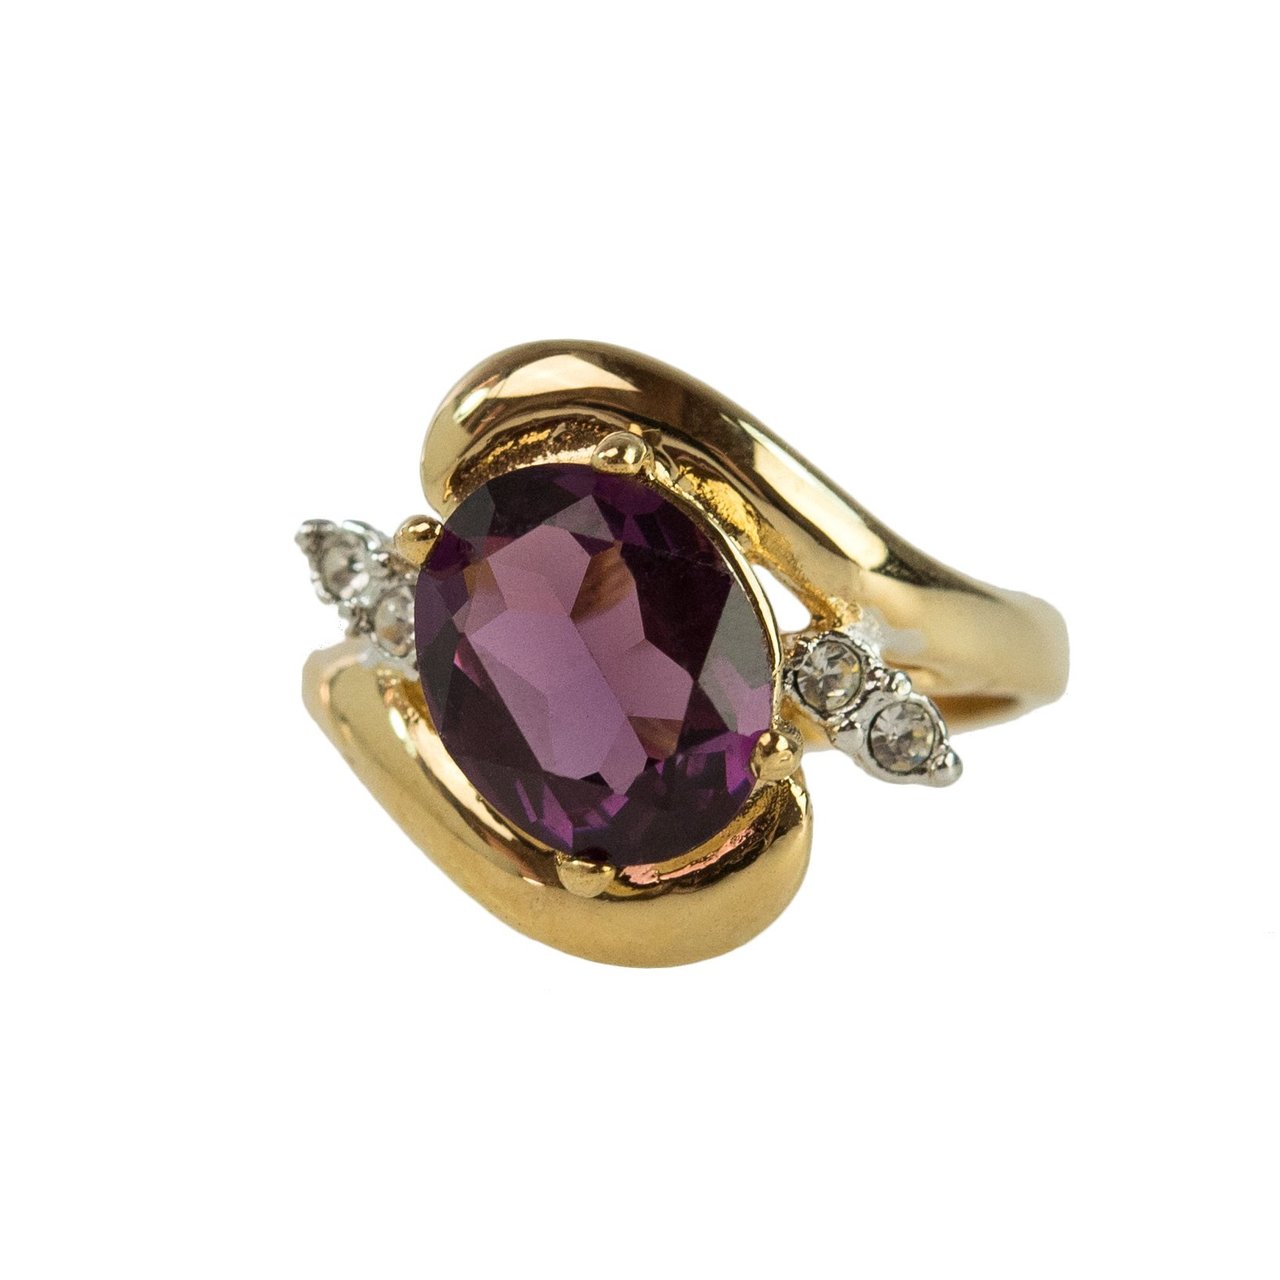 Vintage Ring Amethyst and Clear Swarovski Crystals 18kt Gold Antique Womans Jewelry #R2928 by PVD Vintage Jewelry